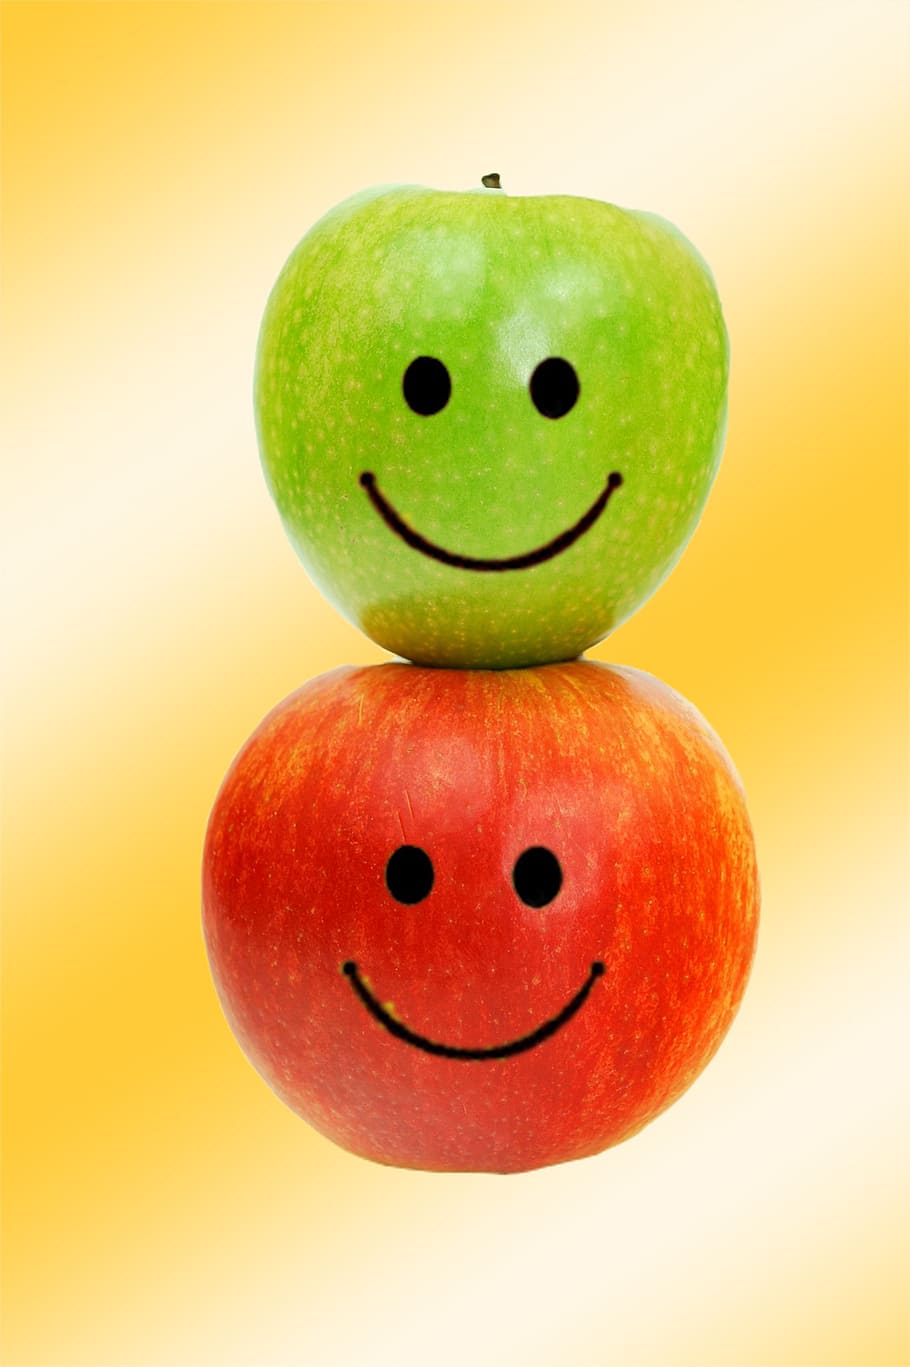 HD wallpaper: apple, laugh, image editing, funny, cheerful, fruit, food,  anthropomorphic smiley face | Wallpaper Flare